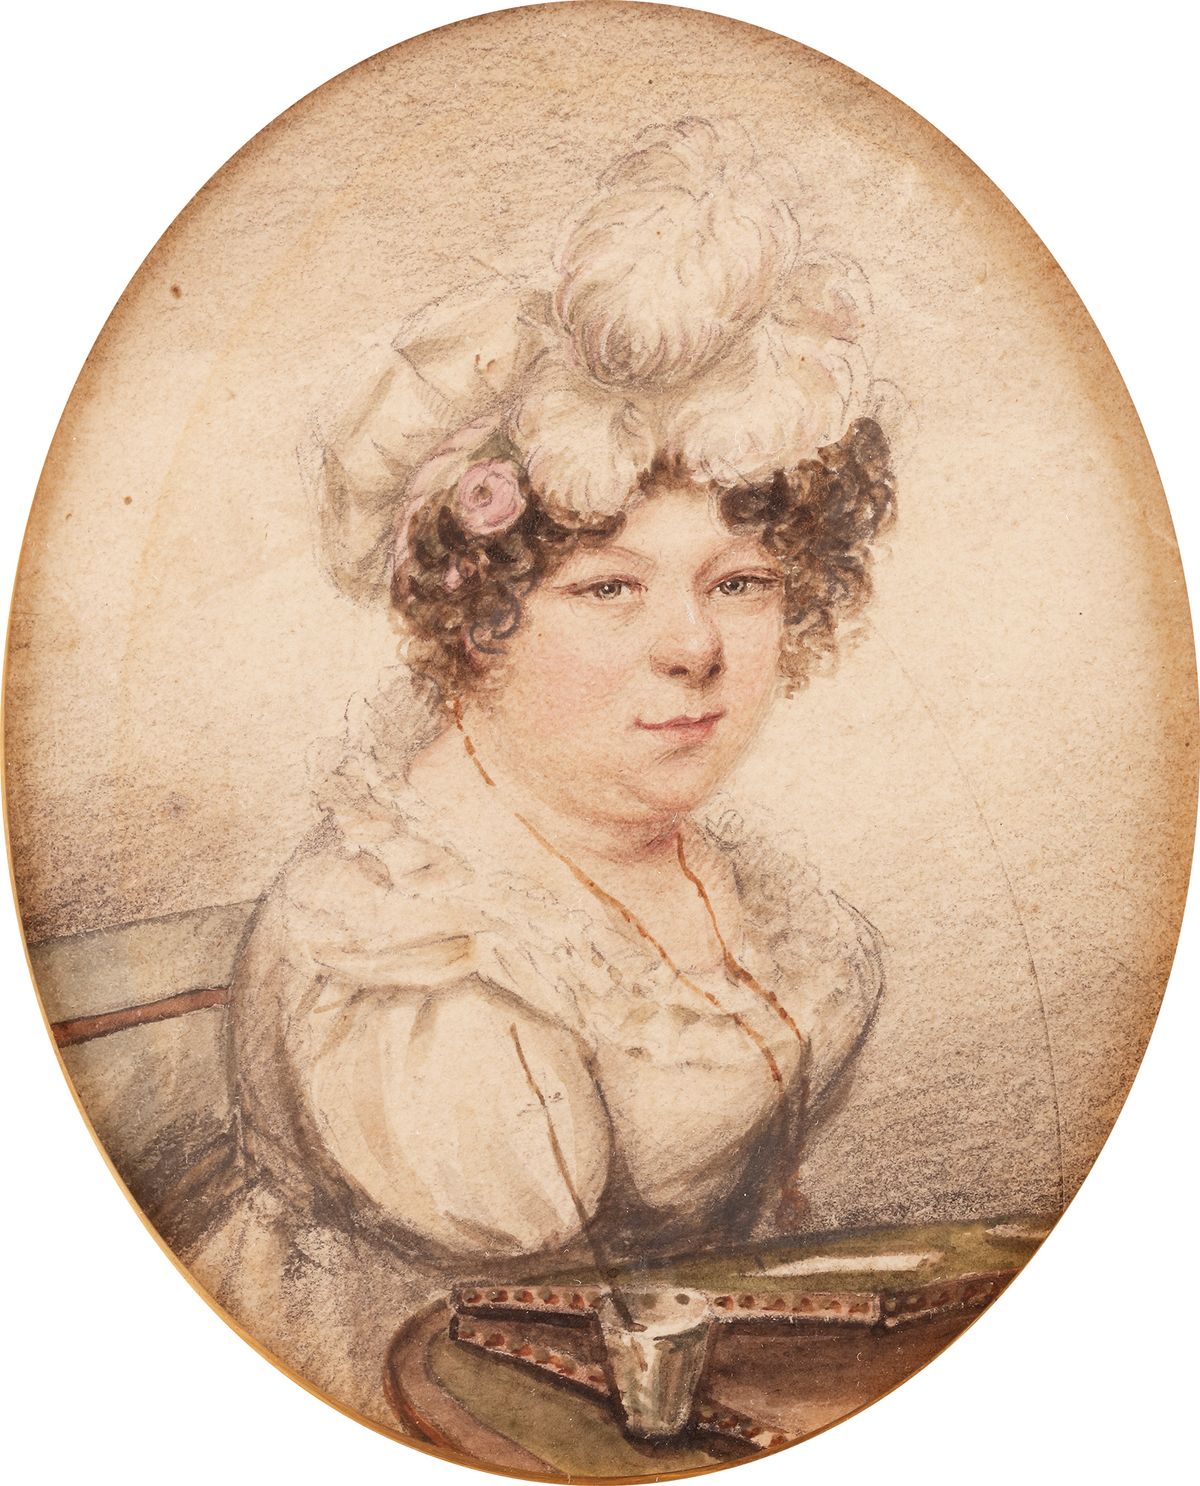 A self-portrait (around 1825) shows Sarah Biffin with her painting slope, her brush pinned to her shoulder
© National Portrait Gallery